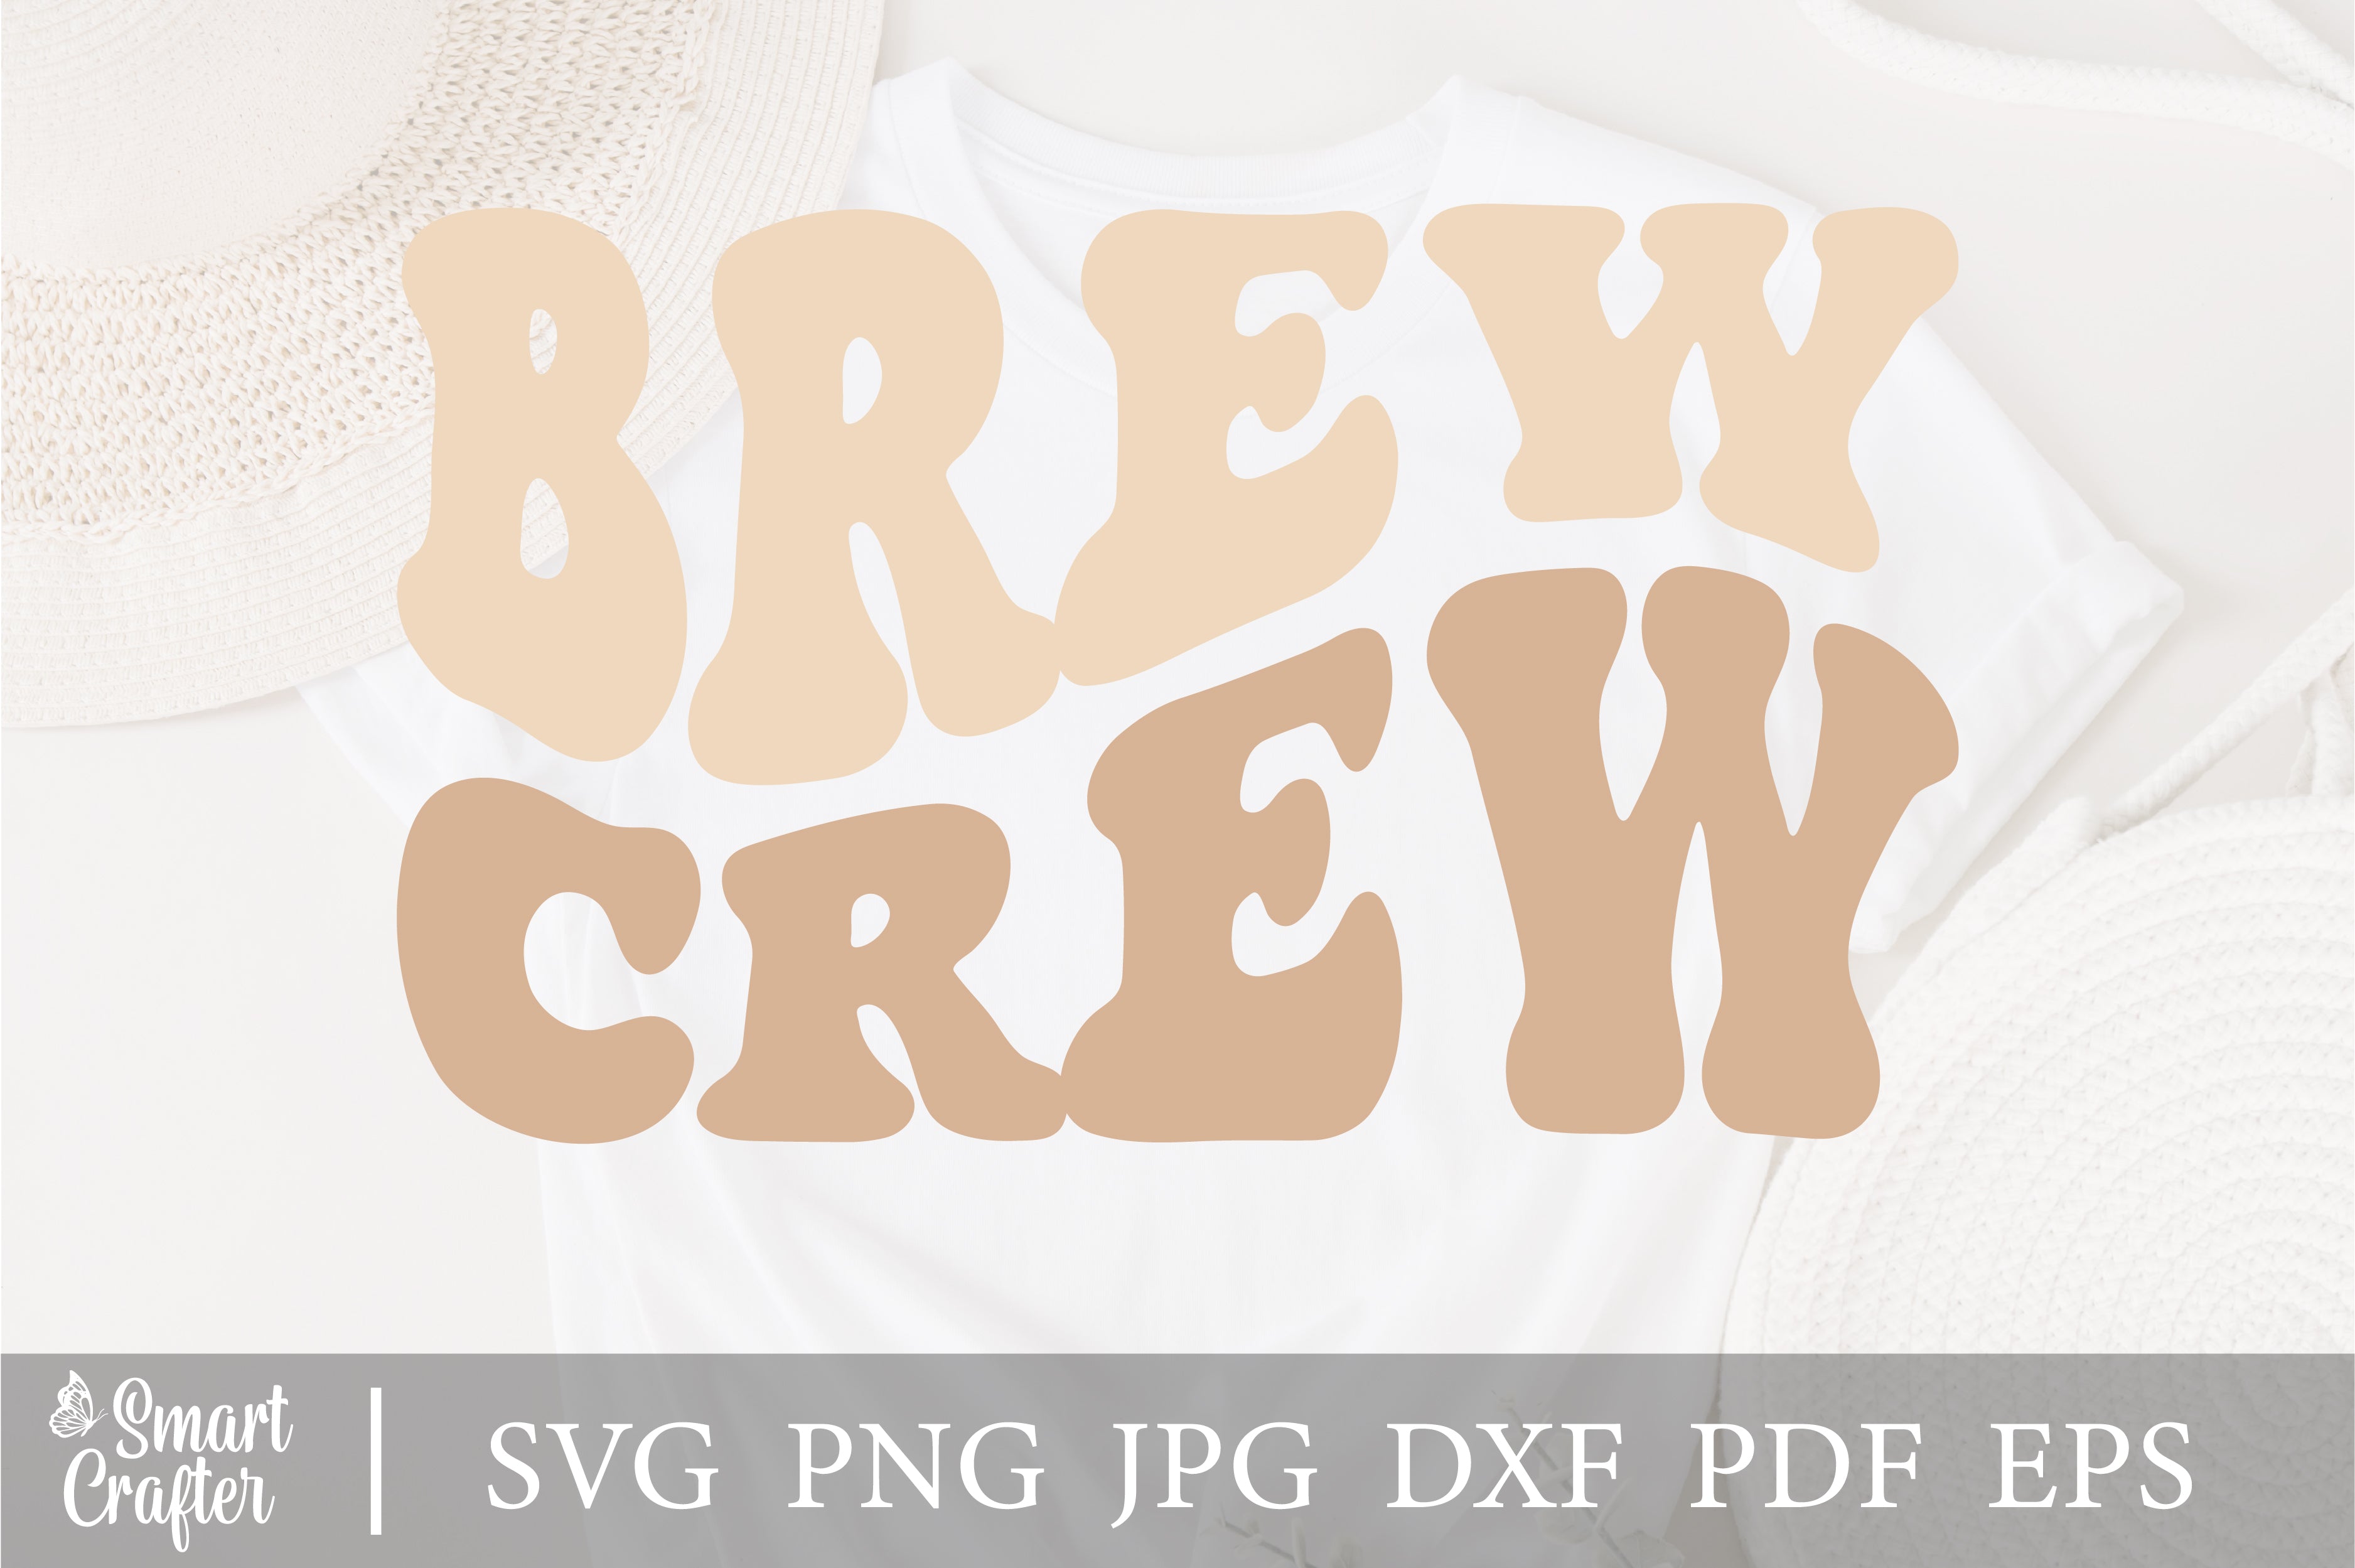 Brew Crew svg, Brews Before I Dos svg, Drinking Girls Bachelorette Party  Shirts SVG, Clipart, Print and Cut File, Stencil, Silhouette, dxf, png, jpg